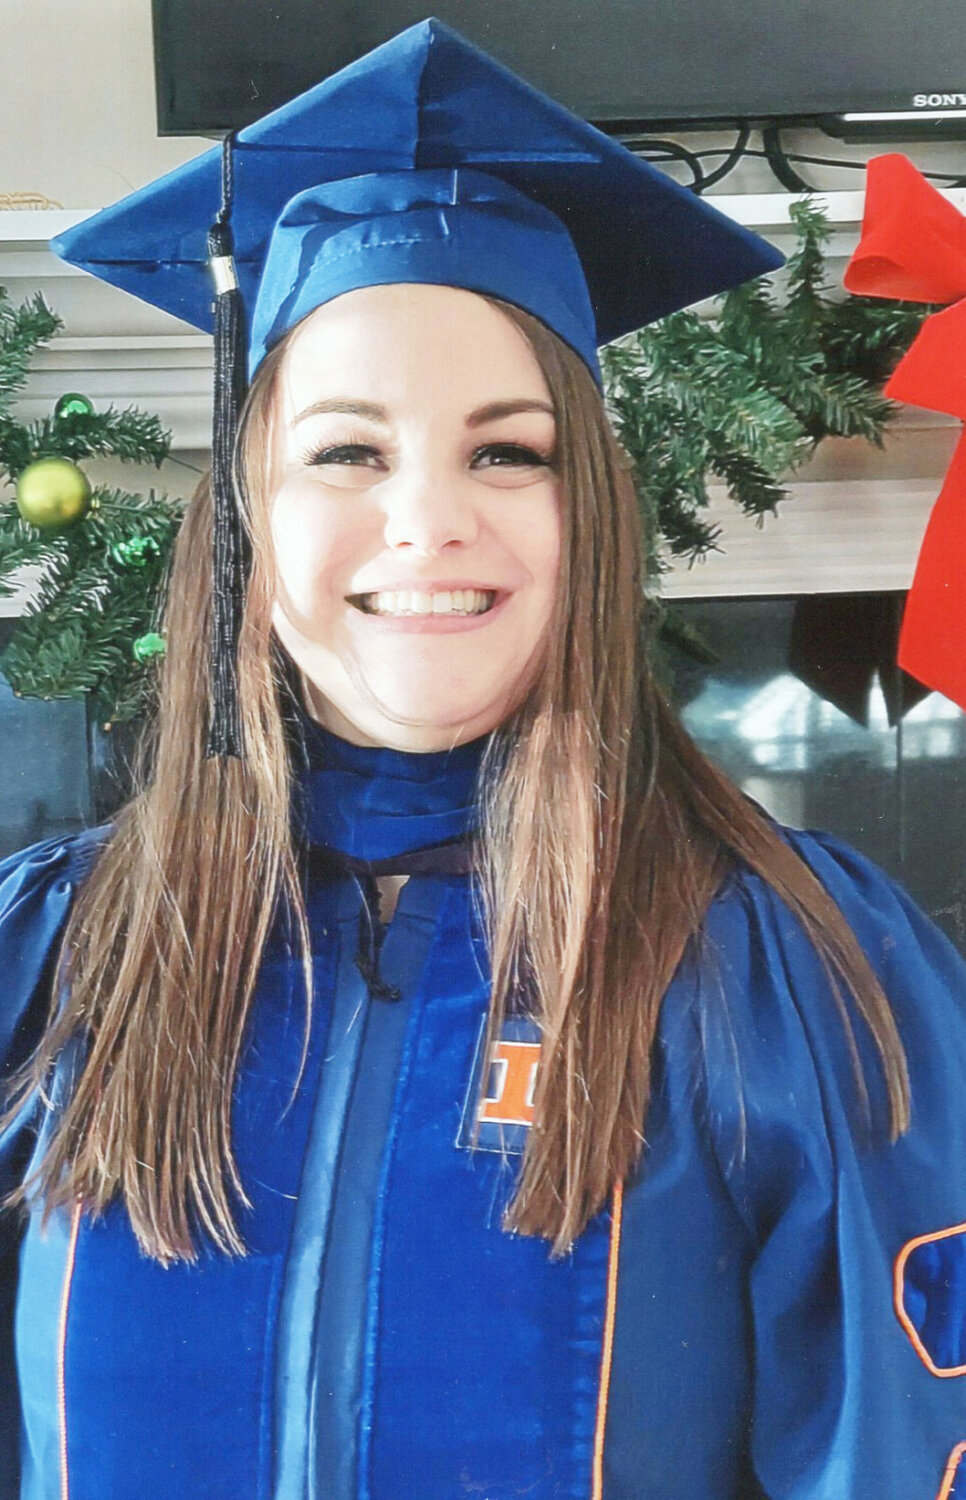 Rochelle Township High School alumna Megan (Sieg) Woodbury has graduated from the University of Illinois at Urbana-Champaign with a PhD in neuroscience.